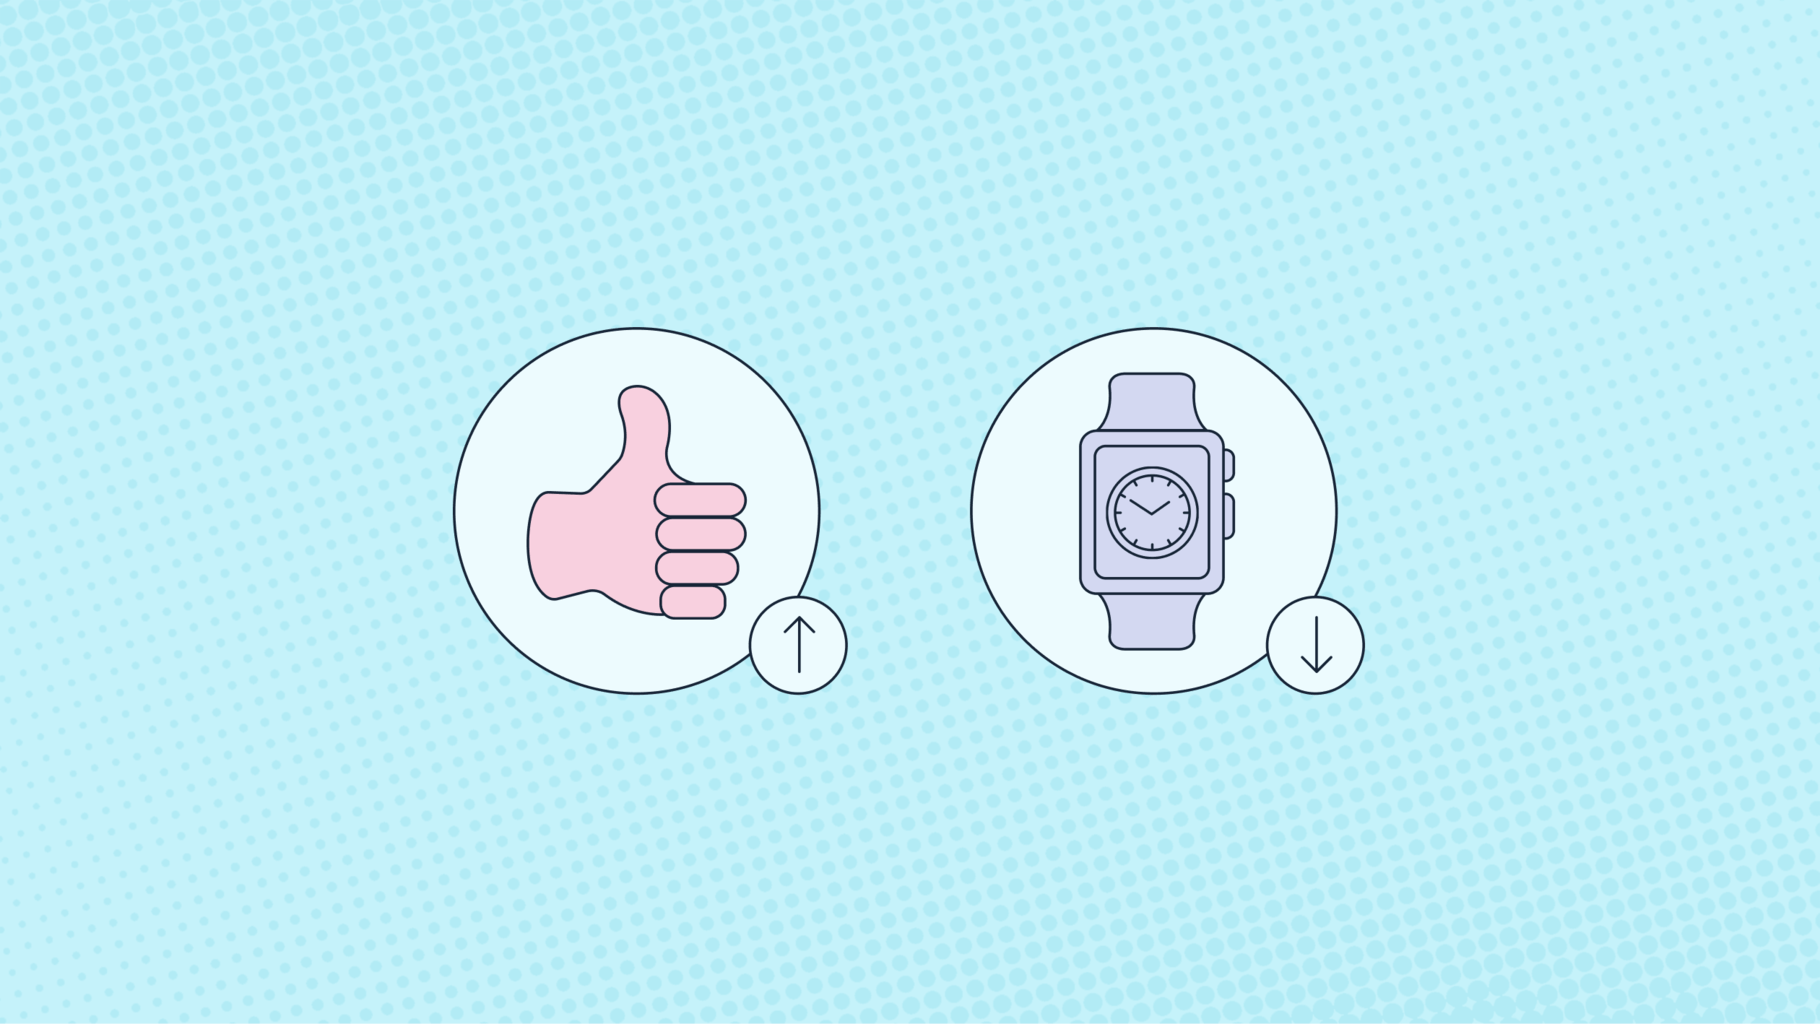 Illustration showing two icons, a thumbs up icon with an upward arrow and a wrist watch with a downward arrow